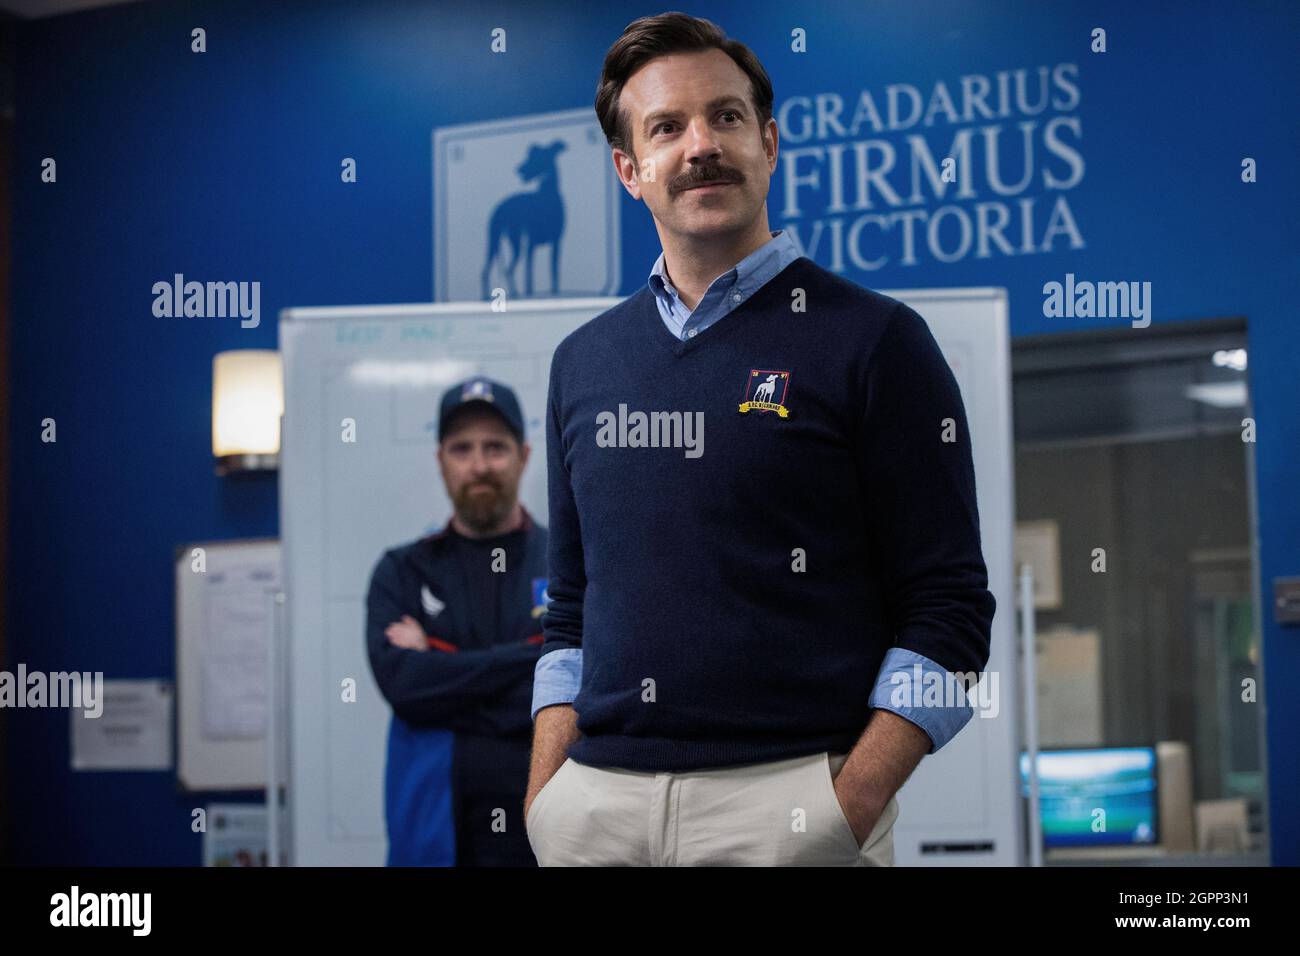 JASON SUDEIKIS in TED LASSO (2020), directed by ZACH BRAFF. Credit: UNIVERSAL TELEVISION / Album Stock Photo